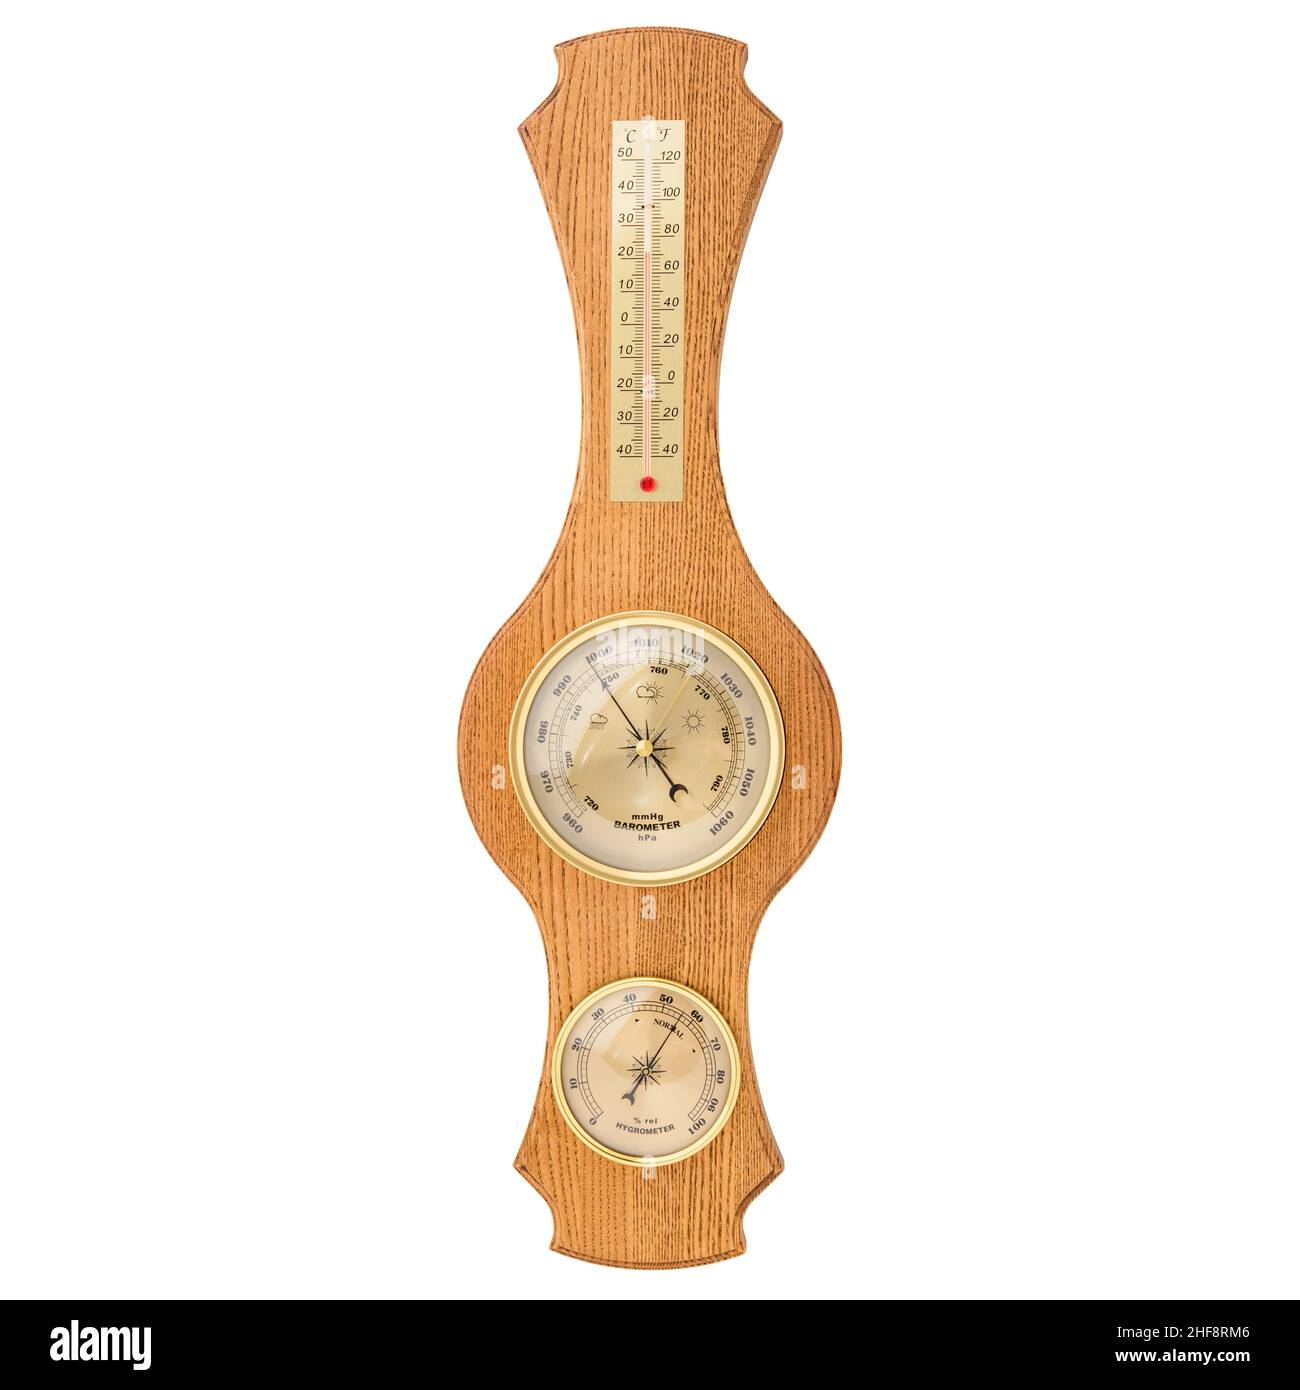 https://c8.alamy.com/comp/2HF8RM6/vintage-wooden-clock-with-barometer-and-old-marine-style-thermometer-on-a-white-background-wall-decor-for-the-interior-2HF8RM6.jpg